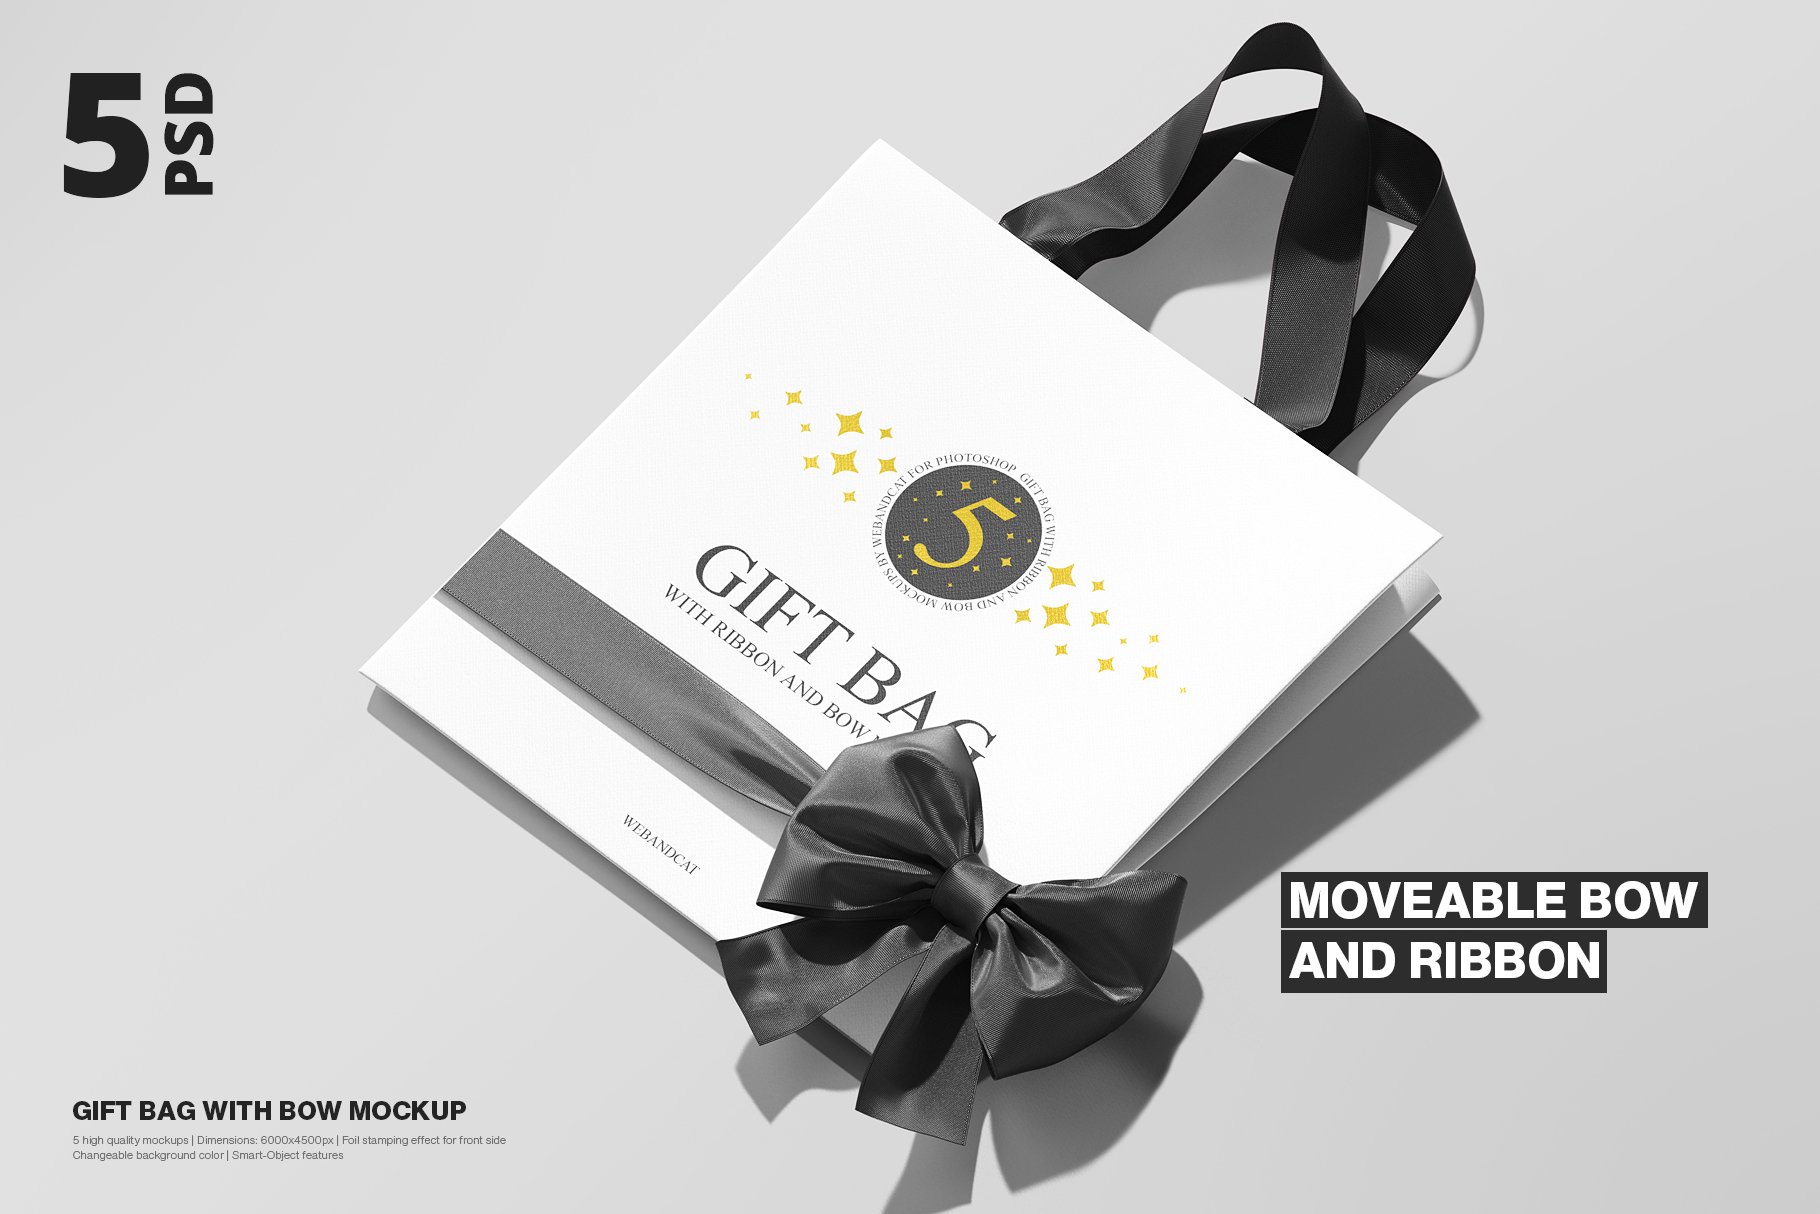 Gift Bag Mockup with Ribbon and Bow cover image.